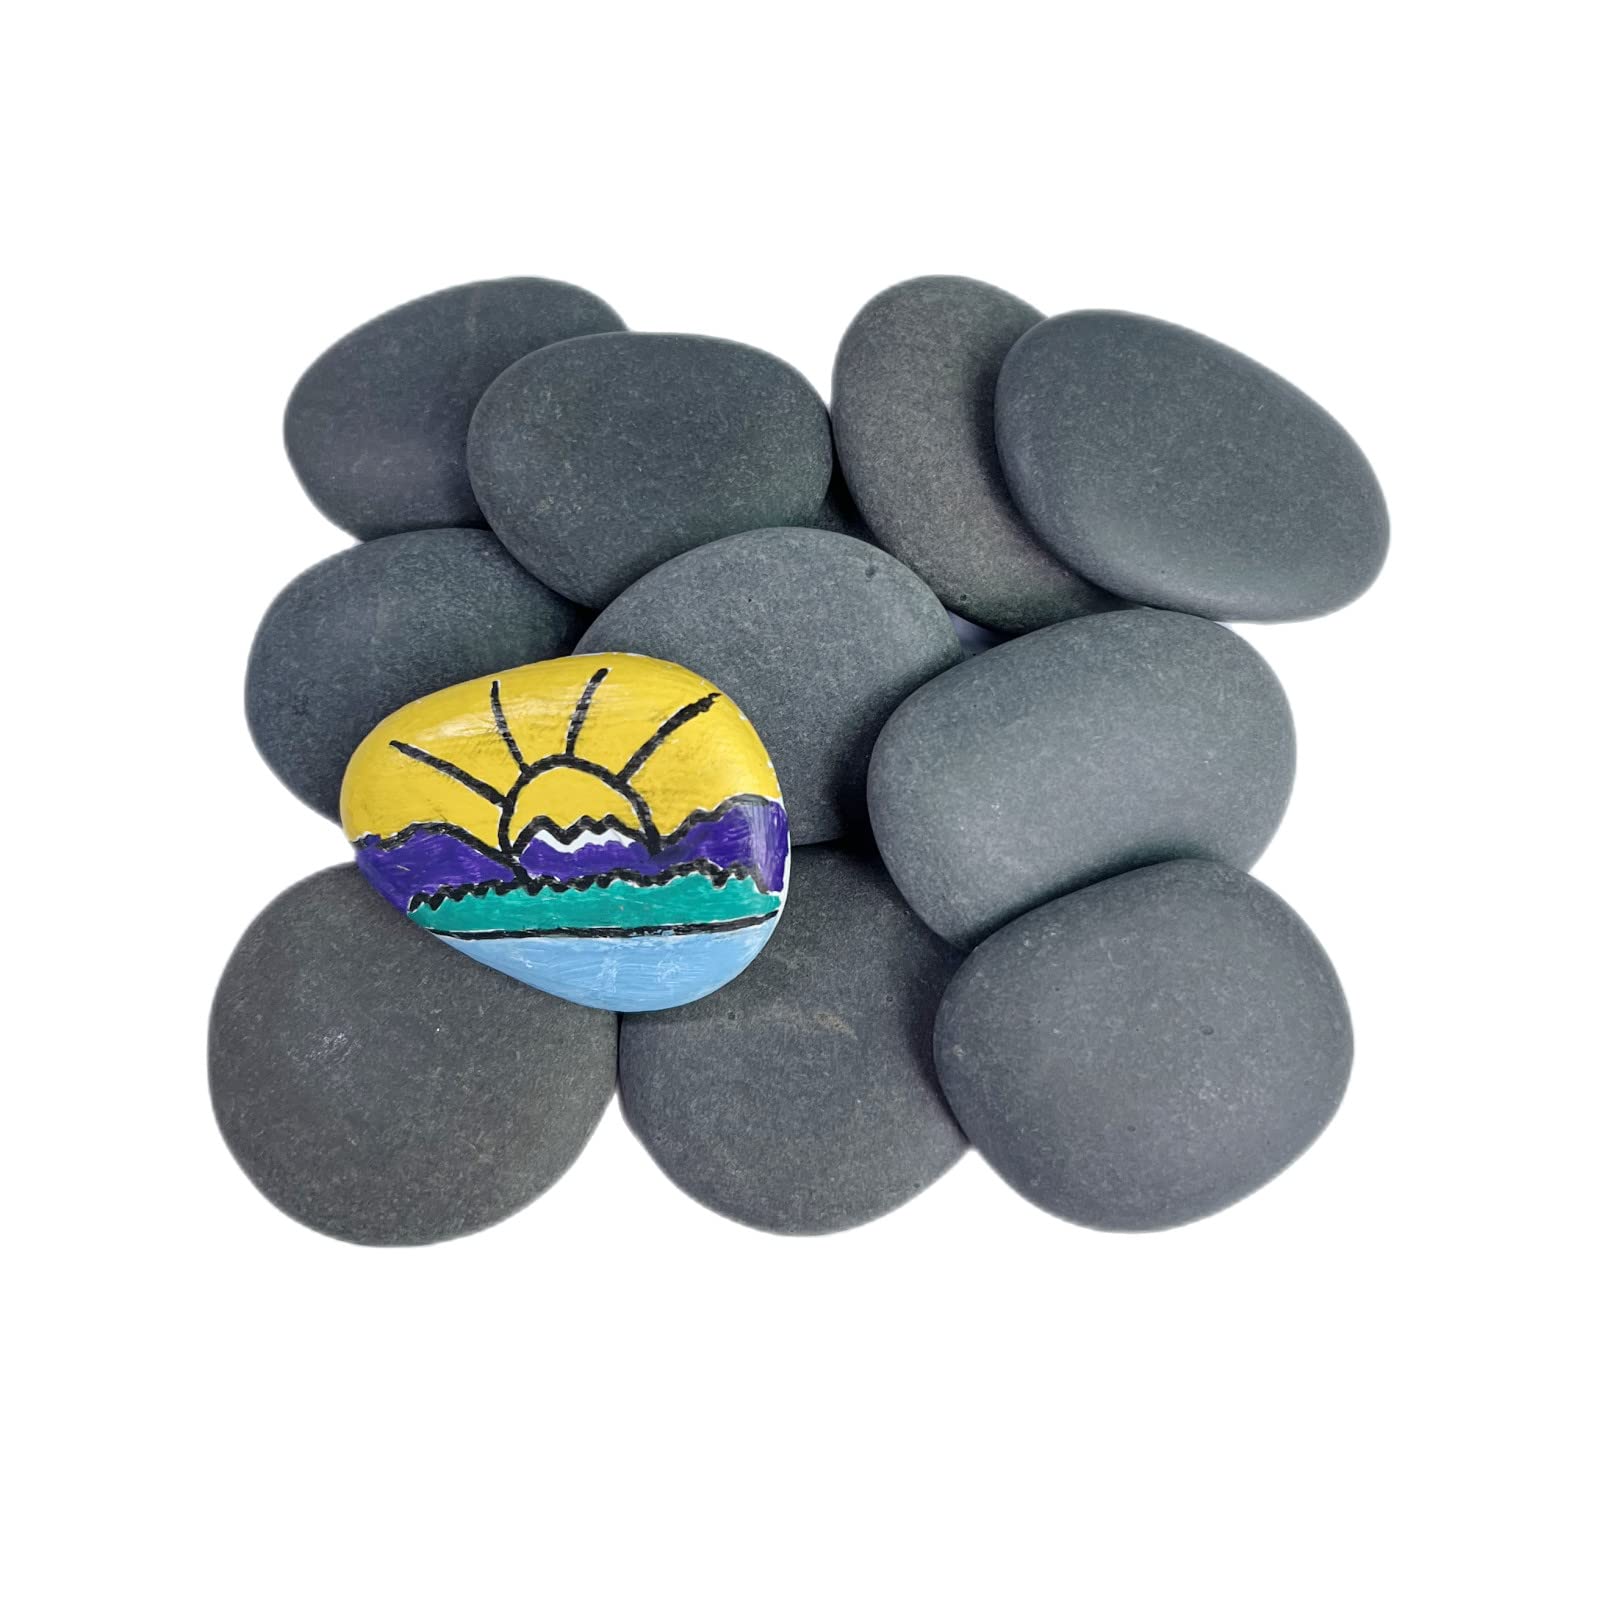 Lifetop 12PCS Painting Rocks DIY Rocks Flat & Smooth Kindness Rocks for  Arts Crafts Decoration Small Rocks for Painting Diameter Around 1.5-2.0  inch Hand Picked for Painting Rocks